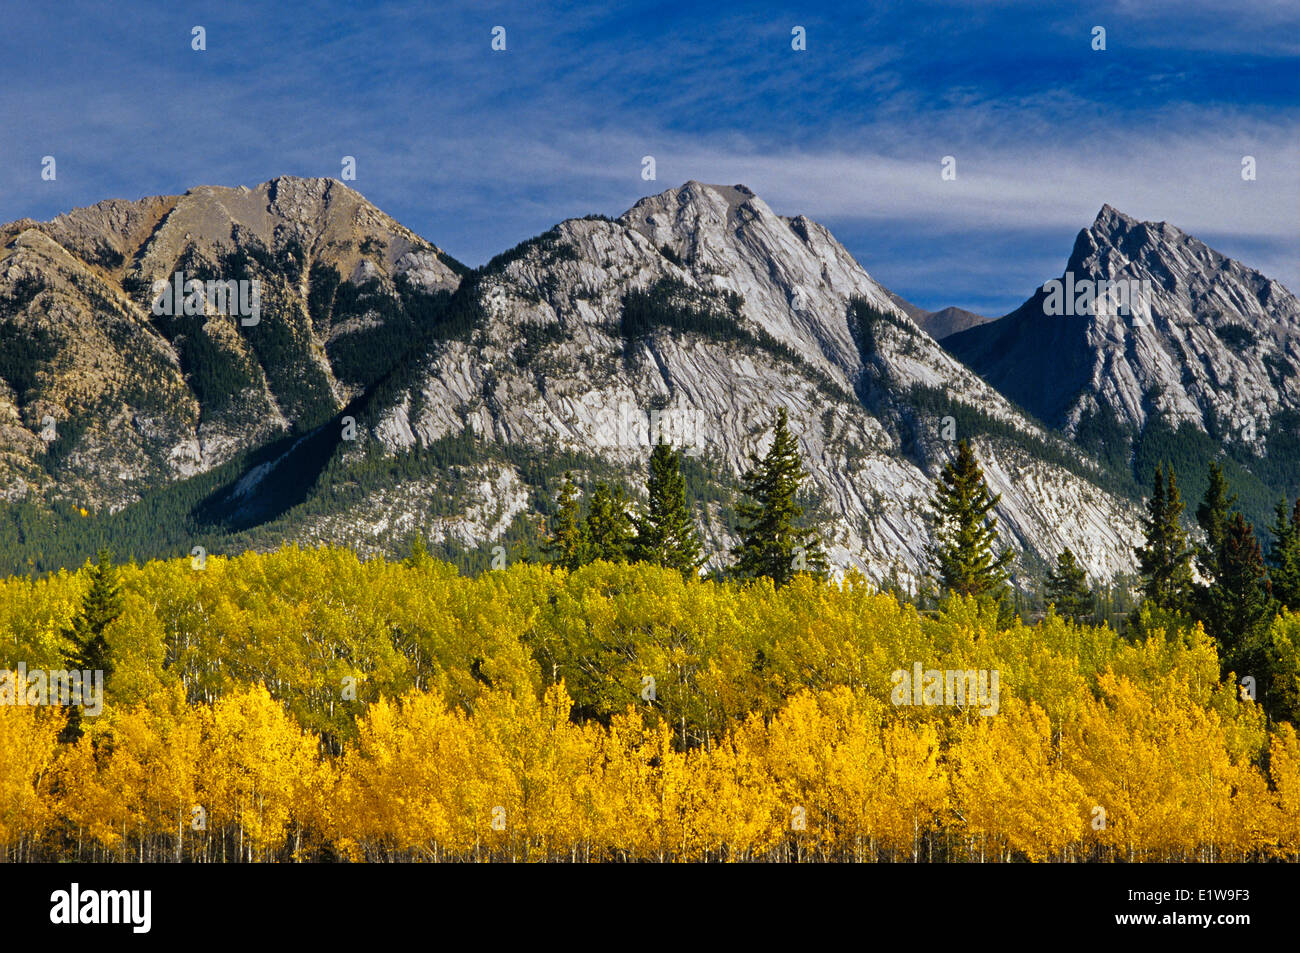 The Canadian Rocky Mountains in autumn, along the David Thompson Highway, Alberta, Canada Stock Photo